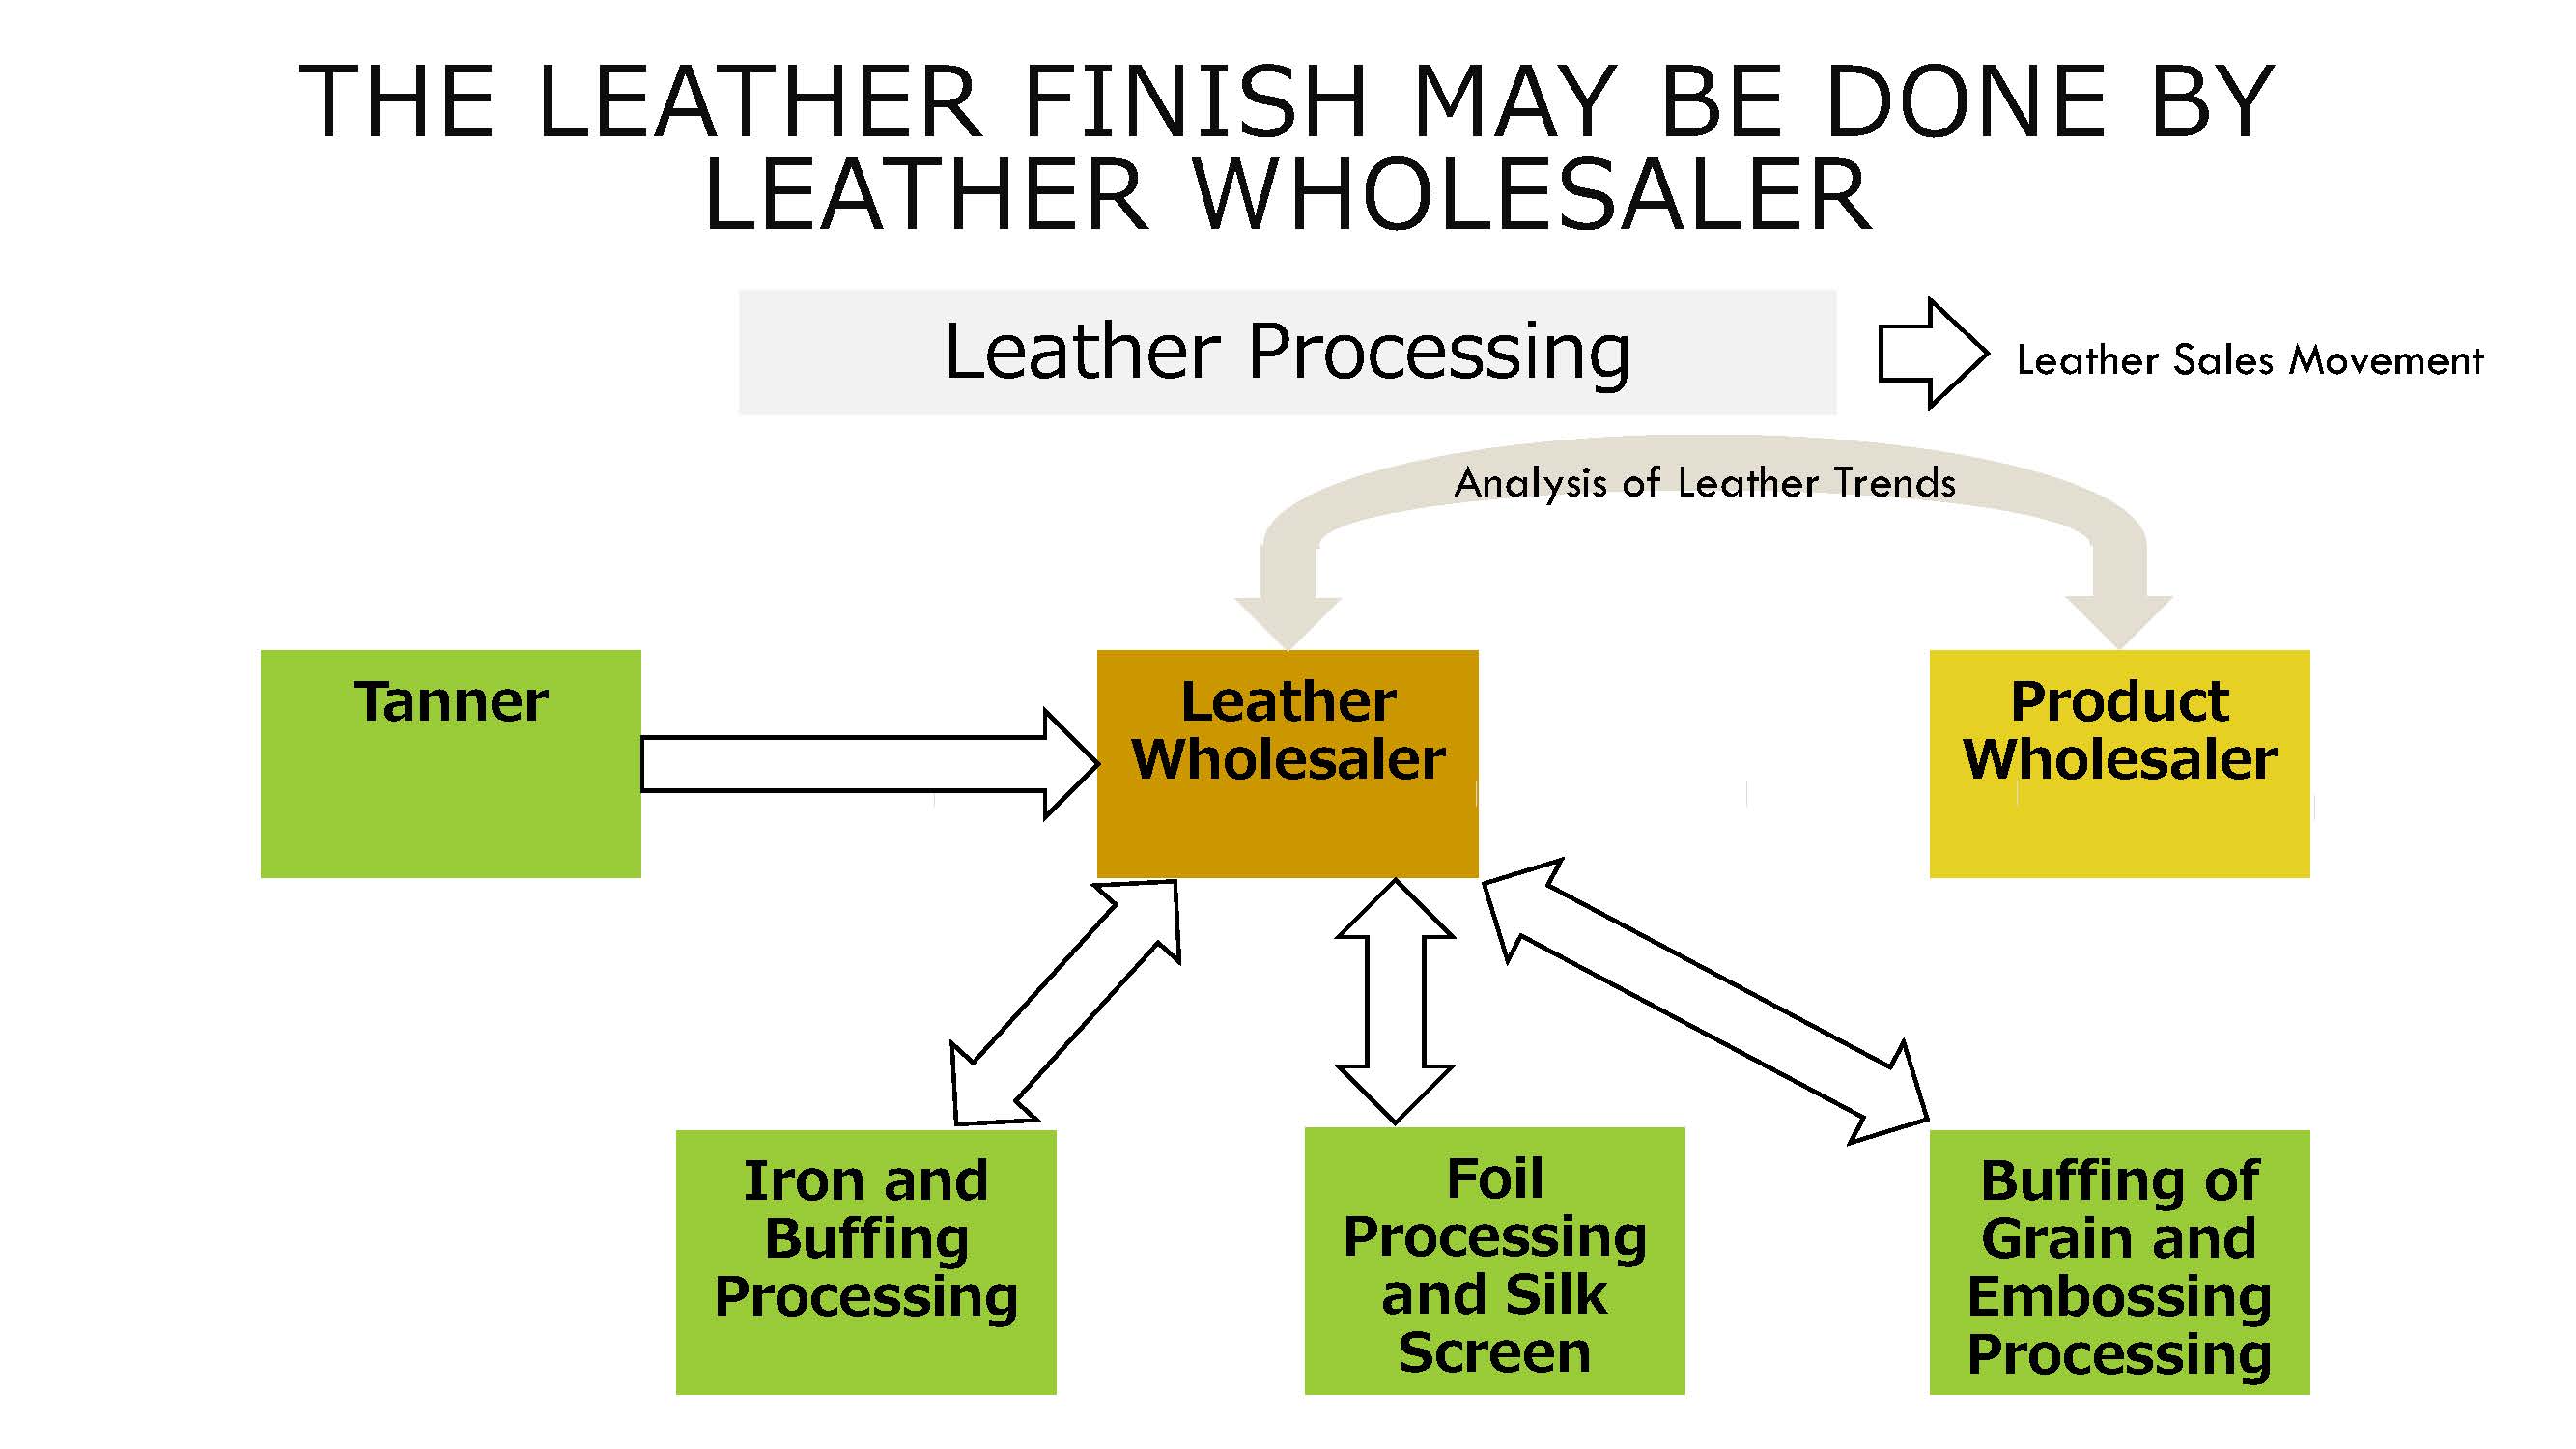 Distribution of Leather